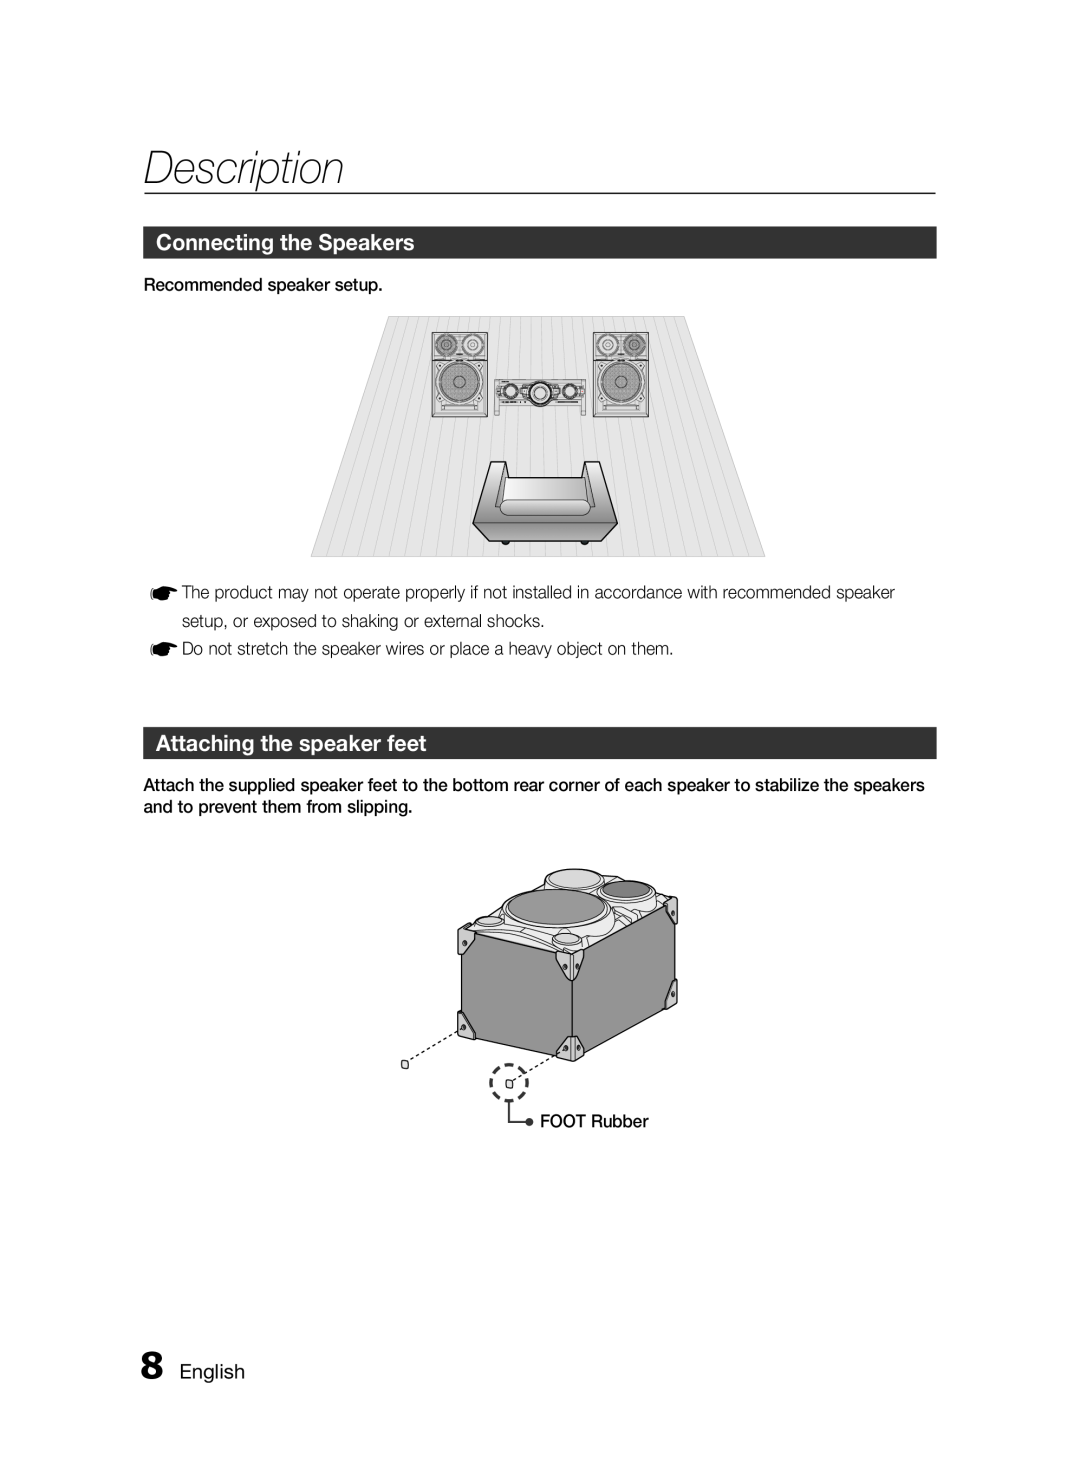 Samsung MXFS9000ZA user manual Connecting the Speakers, Attaching the speaker feet, English, Description 